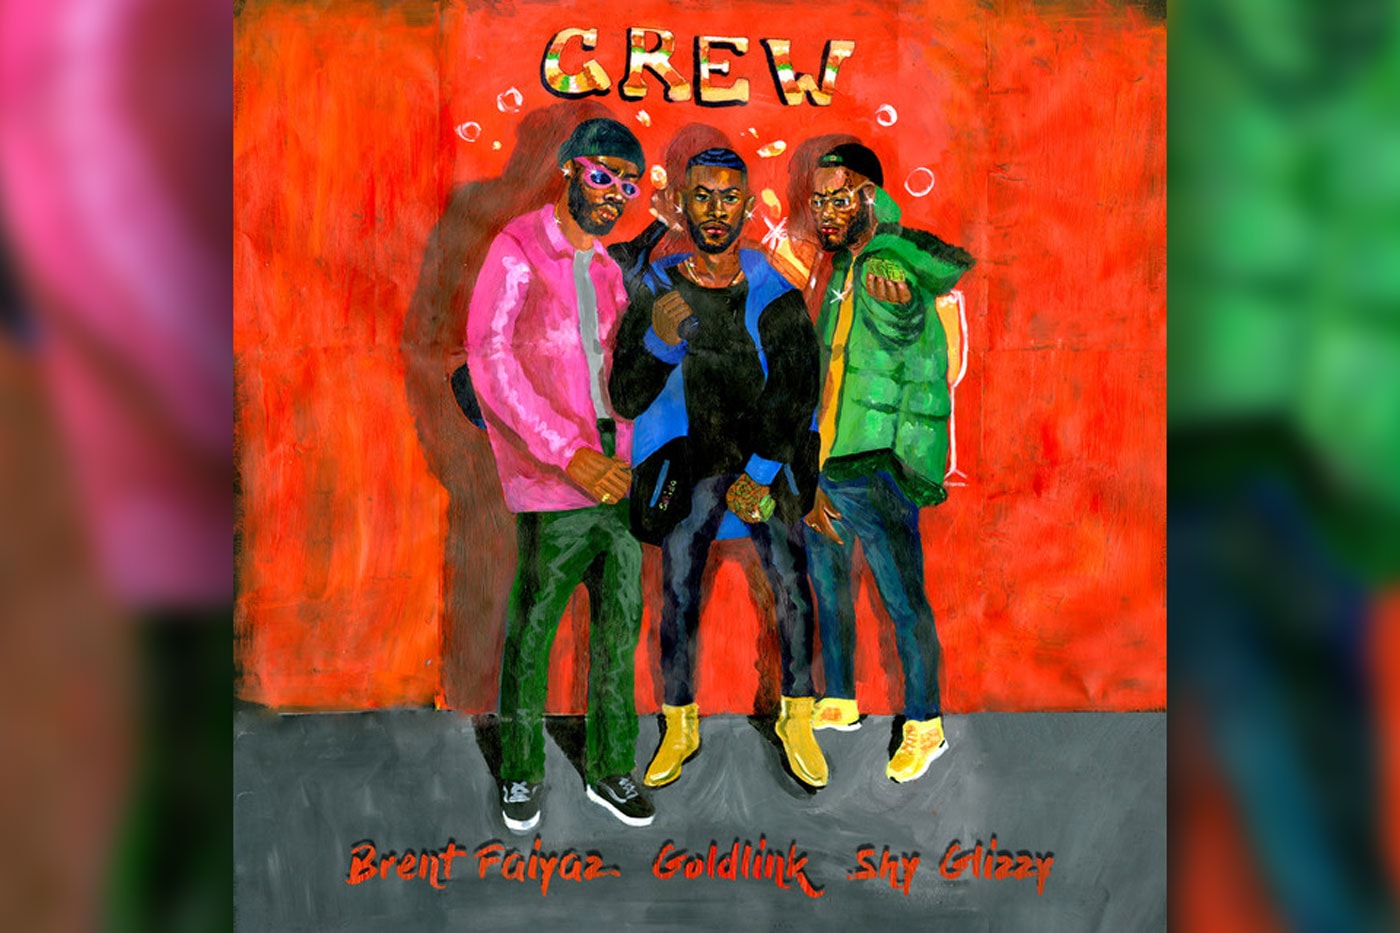 GoldLink New Song "Crew" Featuring Shy Glizzy and Brent Faiyaz